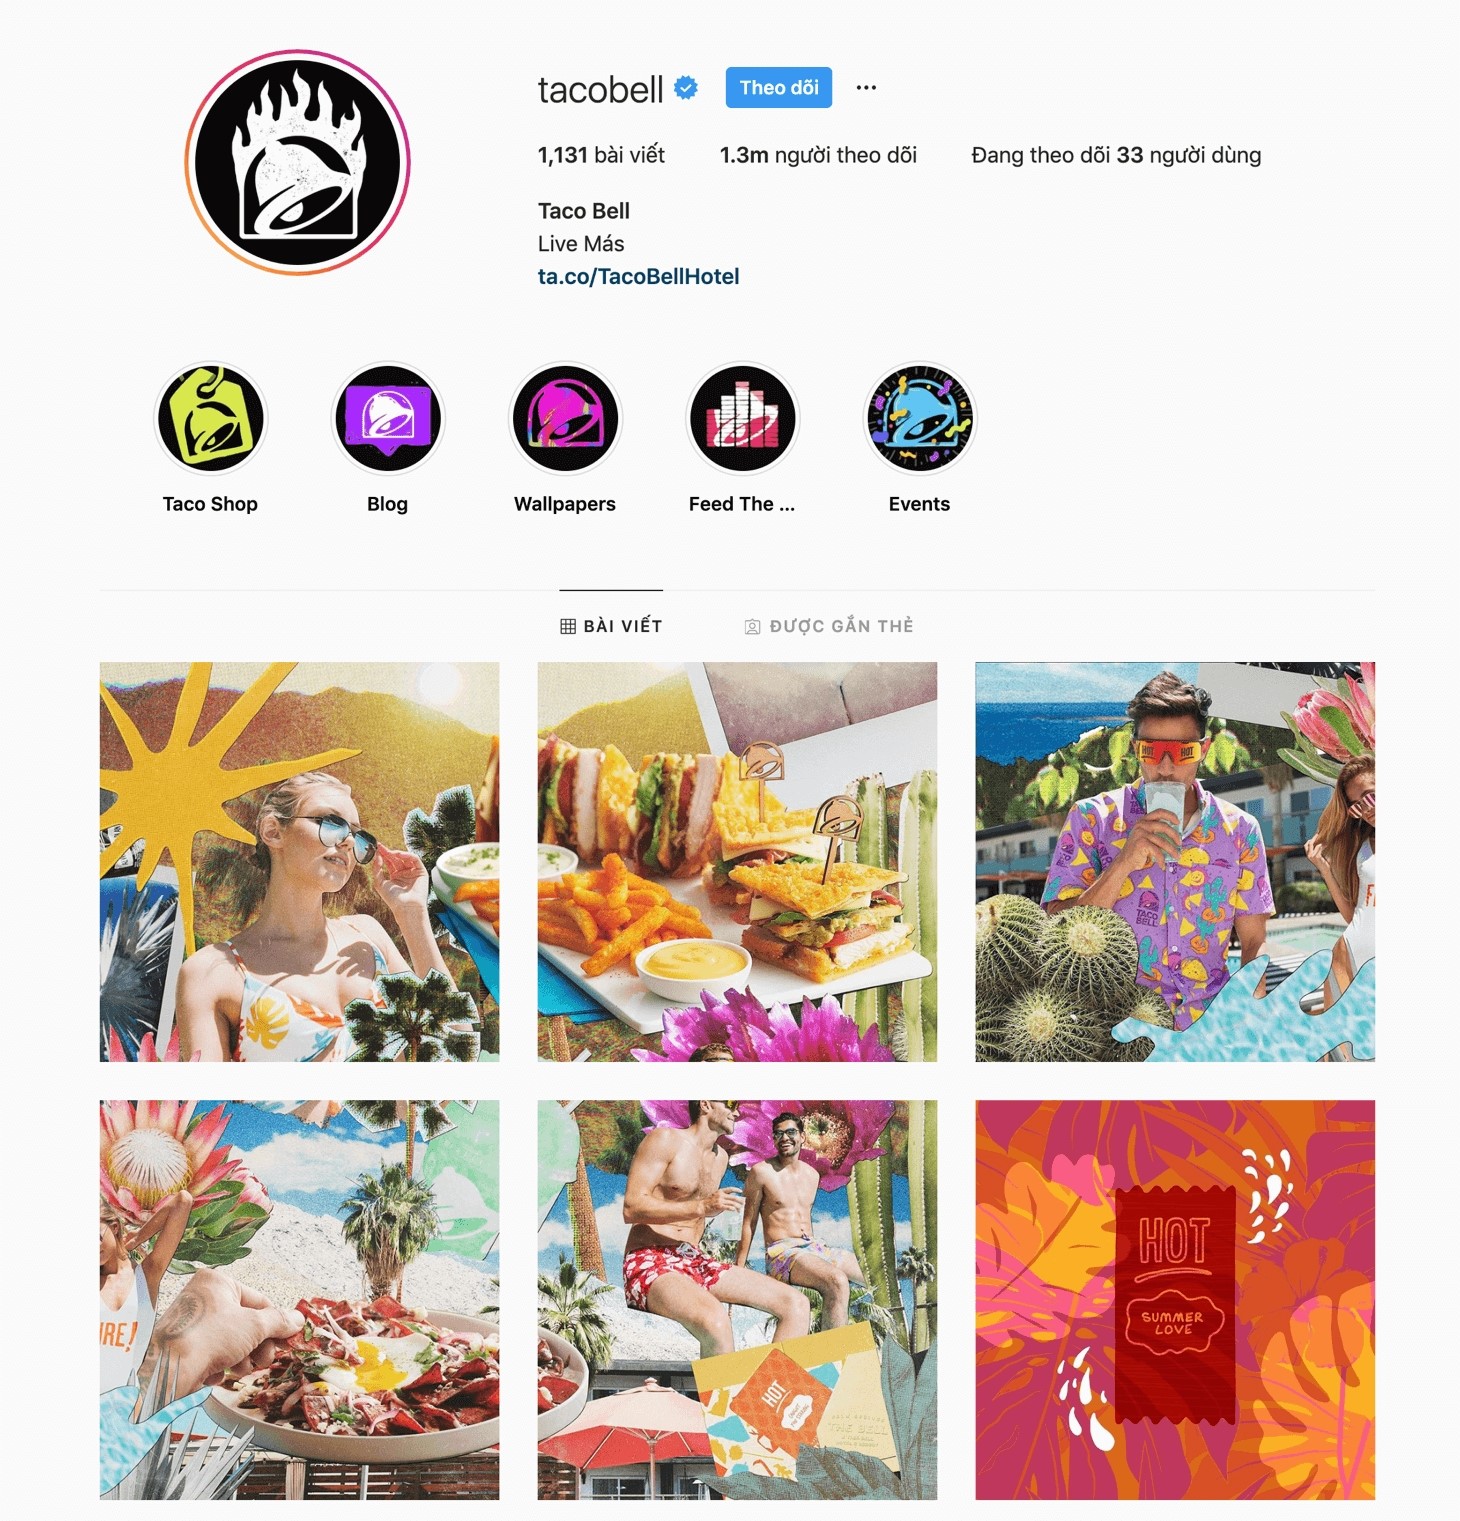 Taco Bell knows how to use Instagram for business